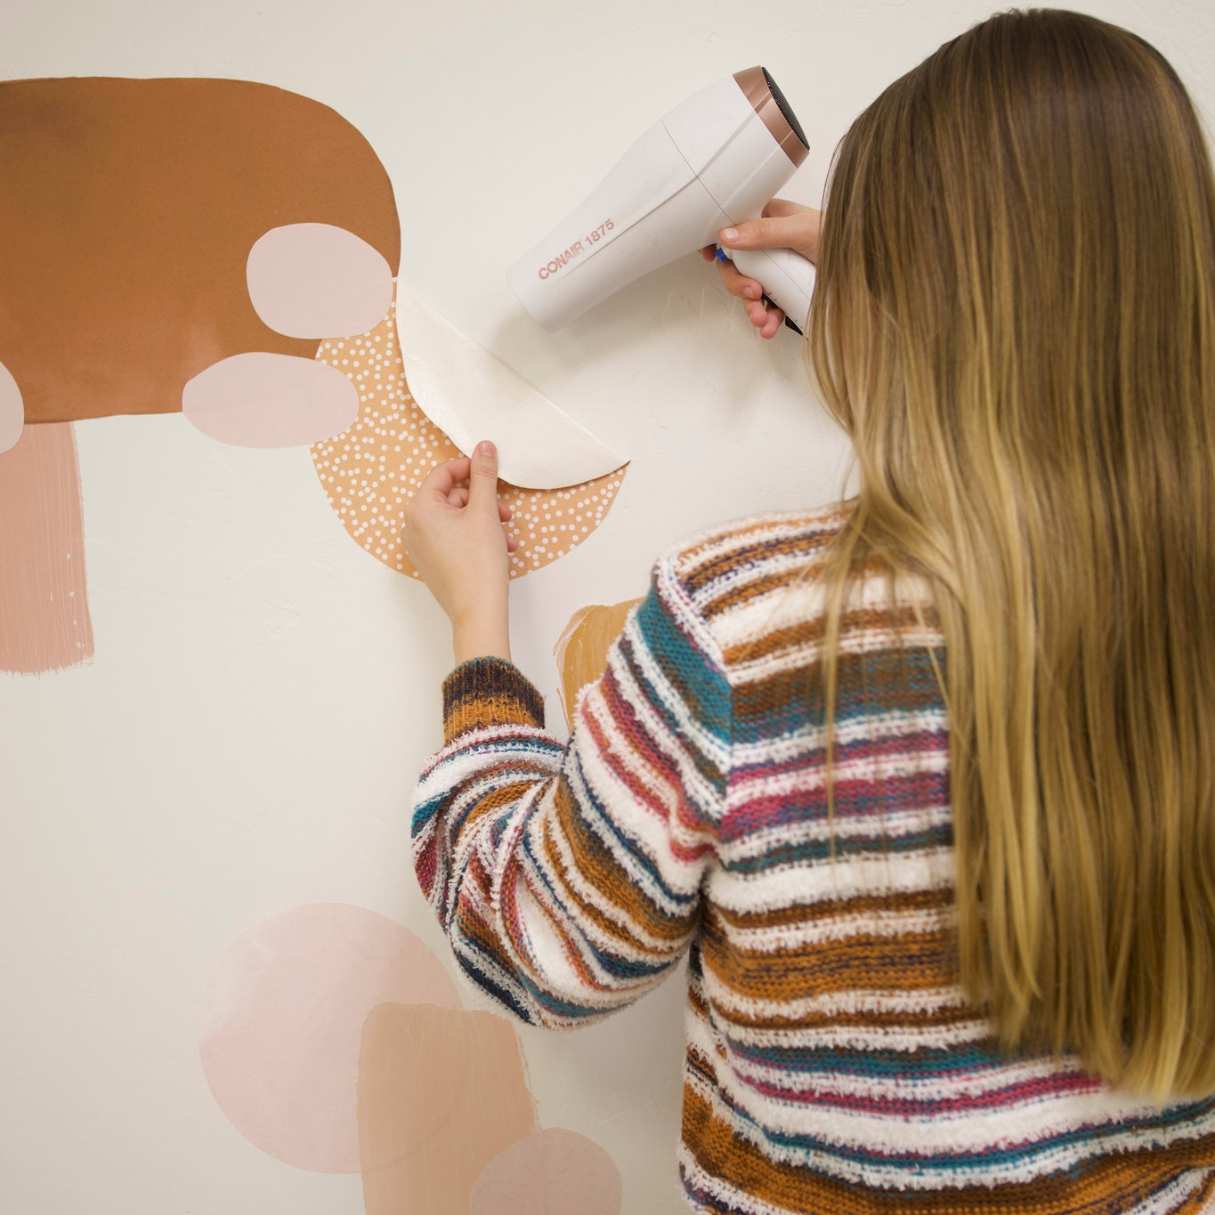 How To Remove Wall Art Stickers